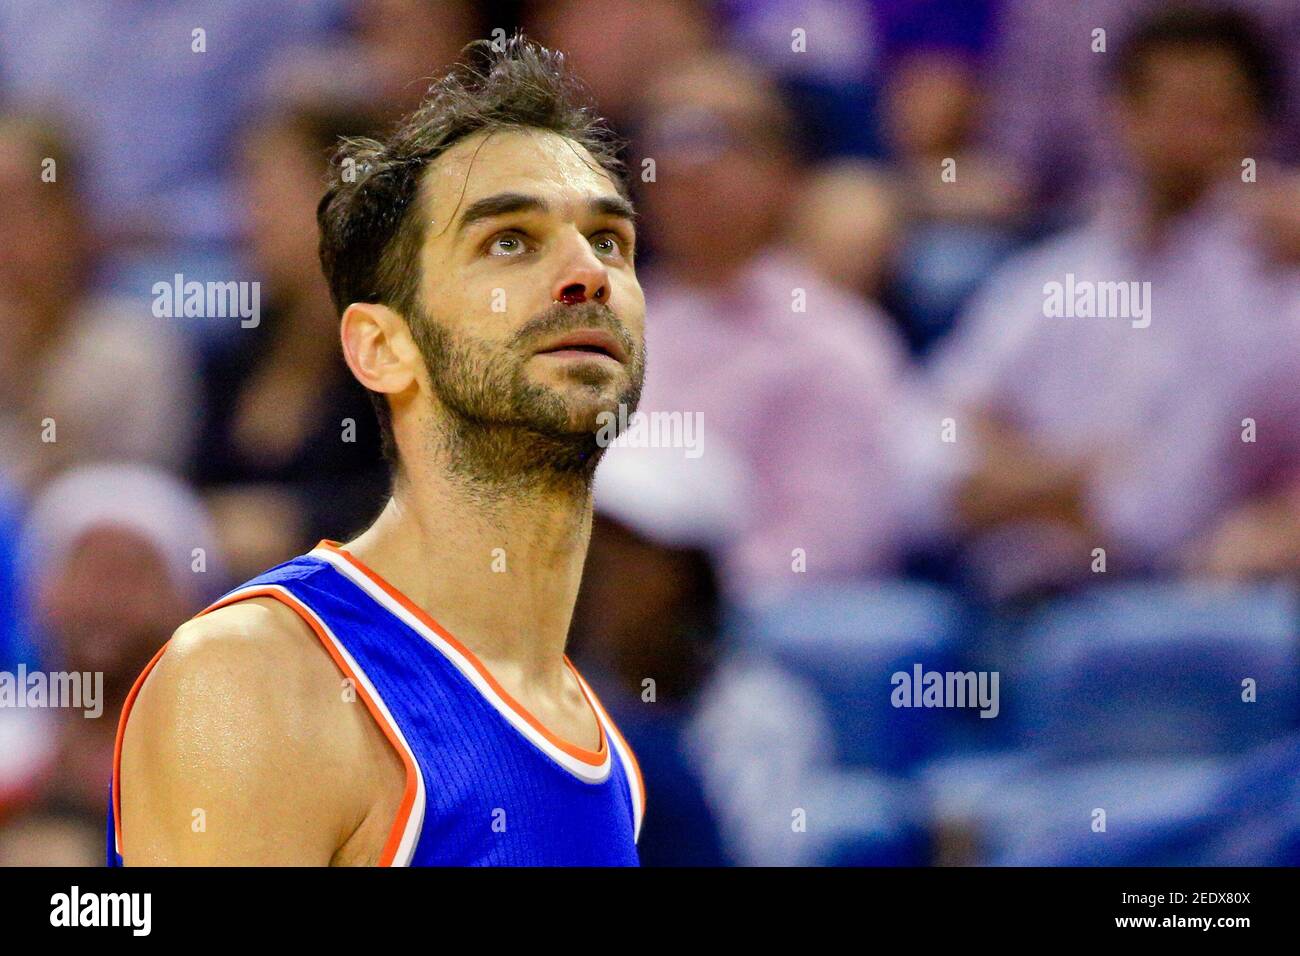 Mar 28, 2016; New Orleans, LA, USA; New York Knicks guard Jose Calderon (3) leaves the court with a bloody nose during the second half of a game against the New Orleans Pelicans at the Smoothie King Center. The Pelicans defeated the Knicks 99-91. Mandatory Credit: Derick E. Hingle-USA TODAY Sports  / Reuters  Picture Supplied by Action Images   (TAGS: Sport Basketball NBA) *** Local Caption *** 2016-03-29T030136Z 256353158 NOCID RTRMADP 3 NBA-NEW-YORK-KNICKS-AT-NEW-ORLEANS-PELICANS.JPG Stock Photo